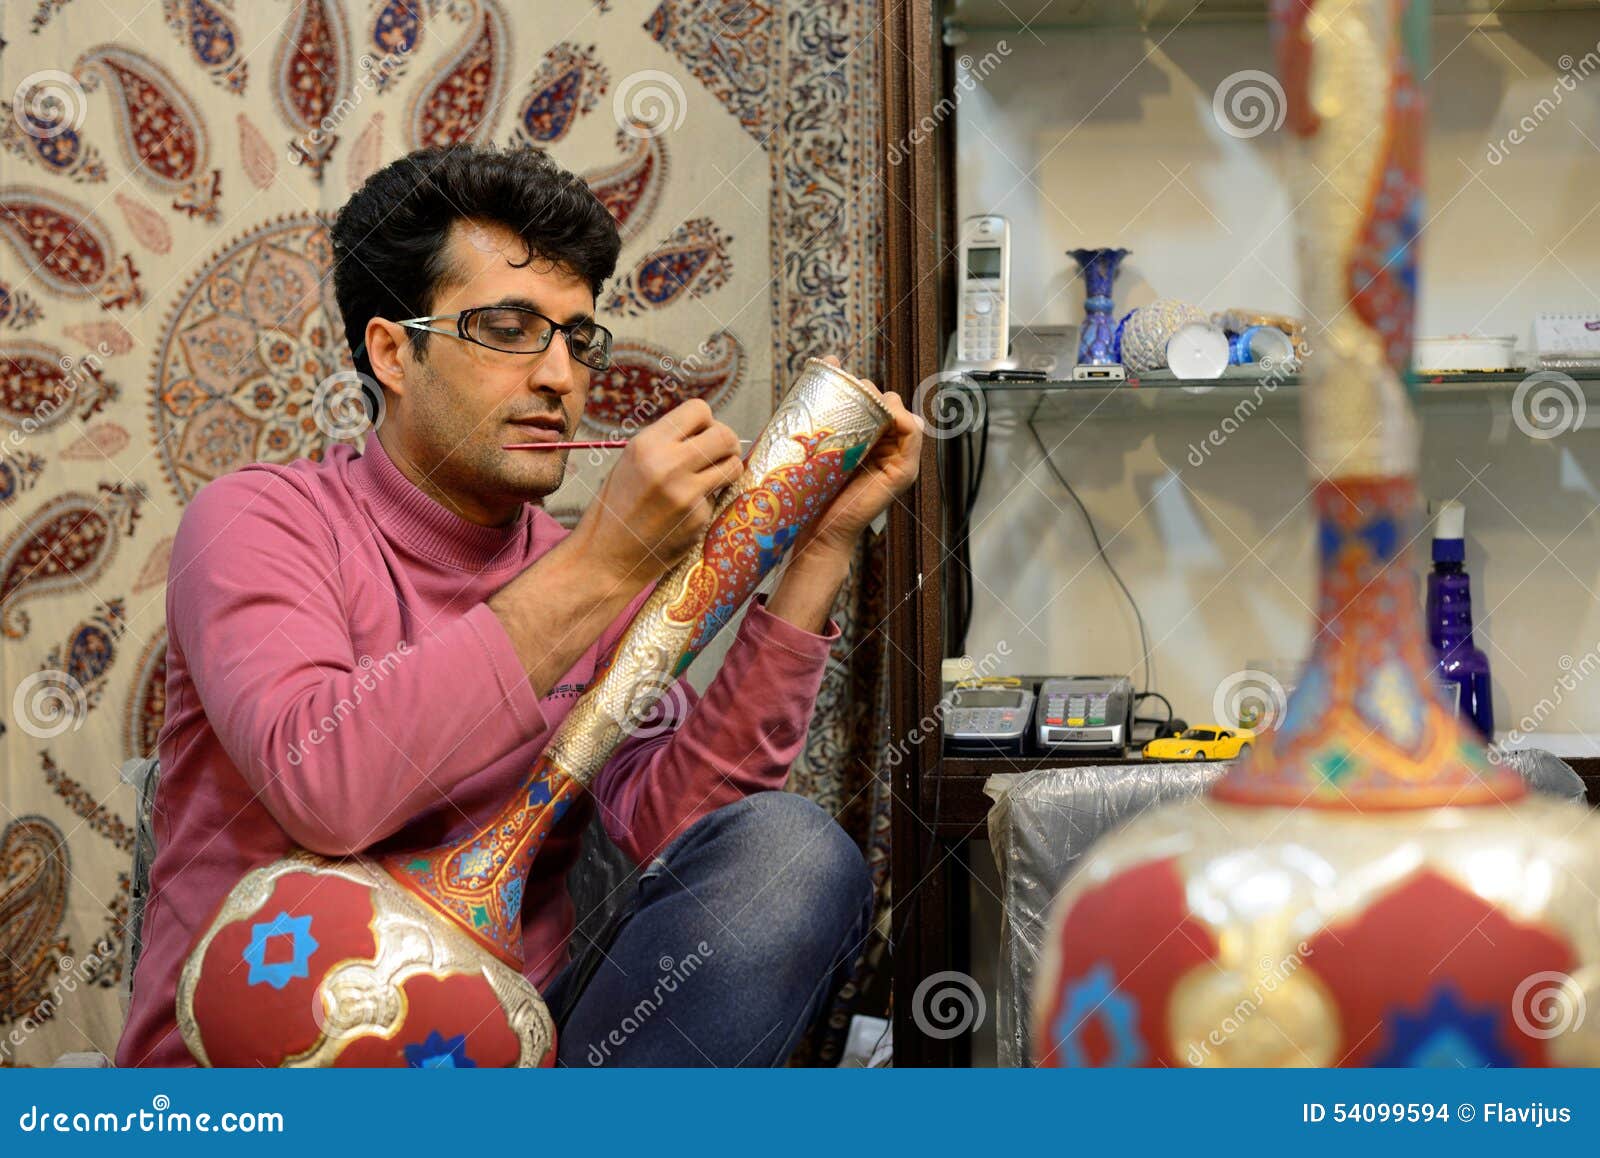 Man making traditional iranian vase, Iran. Unknown man making traditional iranian vase in market (Bazaar) in Isfahan, Iran on April 19, 2015. Bazaar of Isfahan is the most important tourist attraction in Isfahan, Iran.